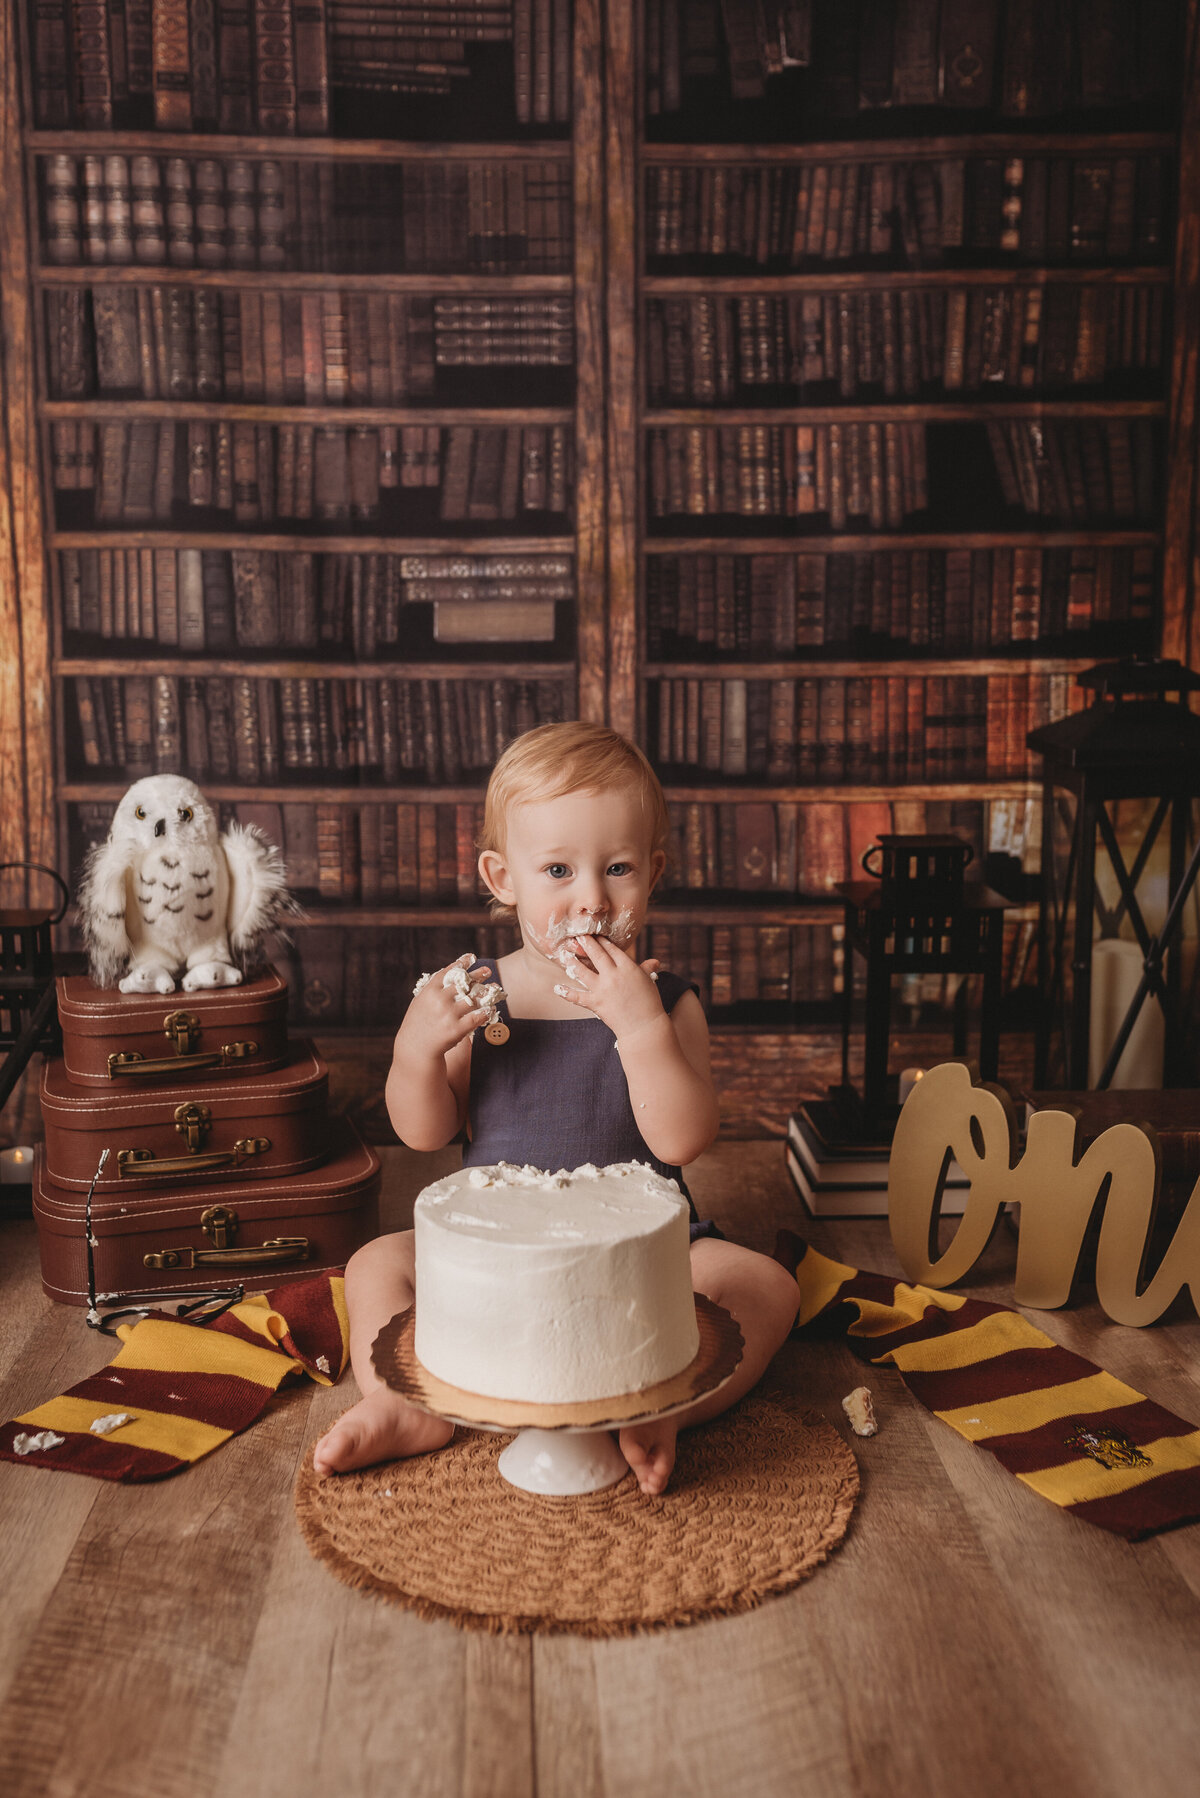 Harry Potter themed cake smash portrait session book case in background with stack of suitcases and white snowy owl on top, Happy Potter scarf around baby with the letters O N E and one year old boy eating white cake with his hands licking his fingers